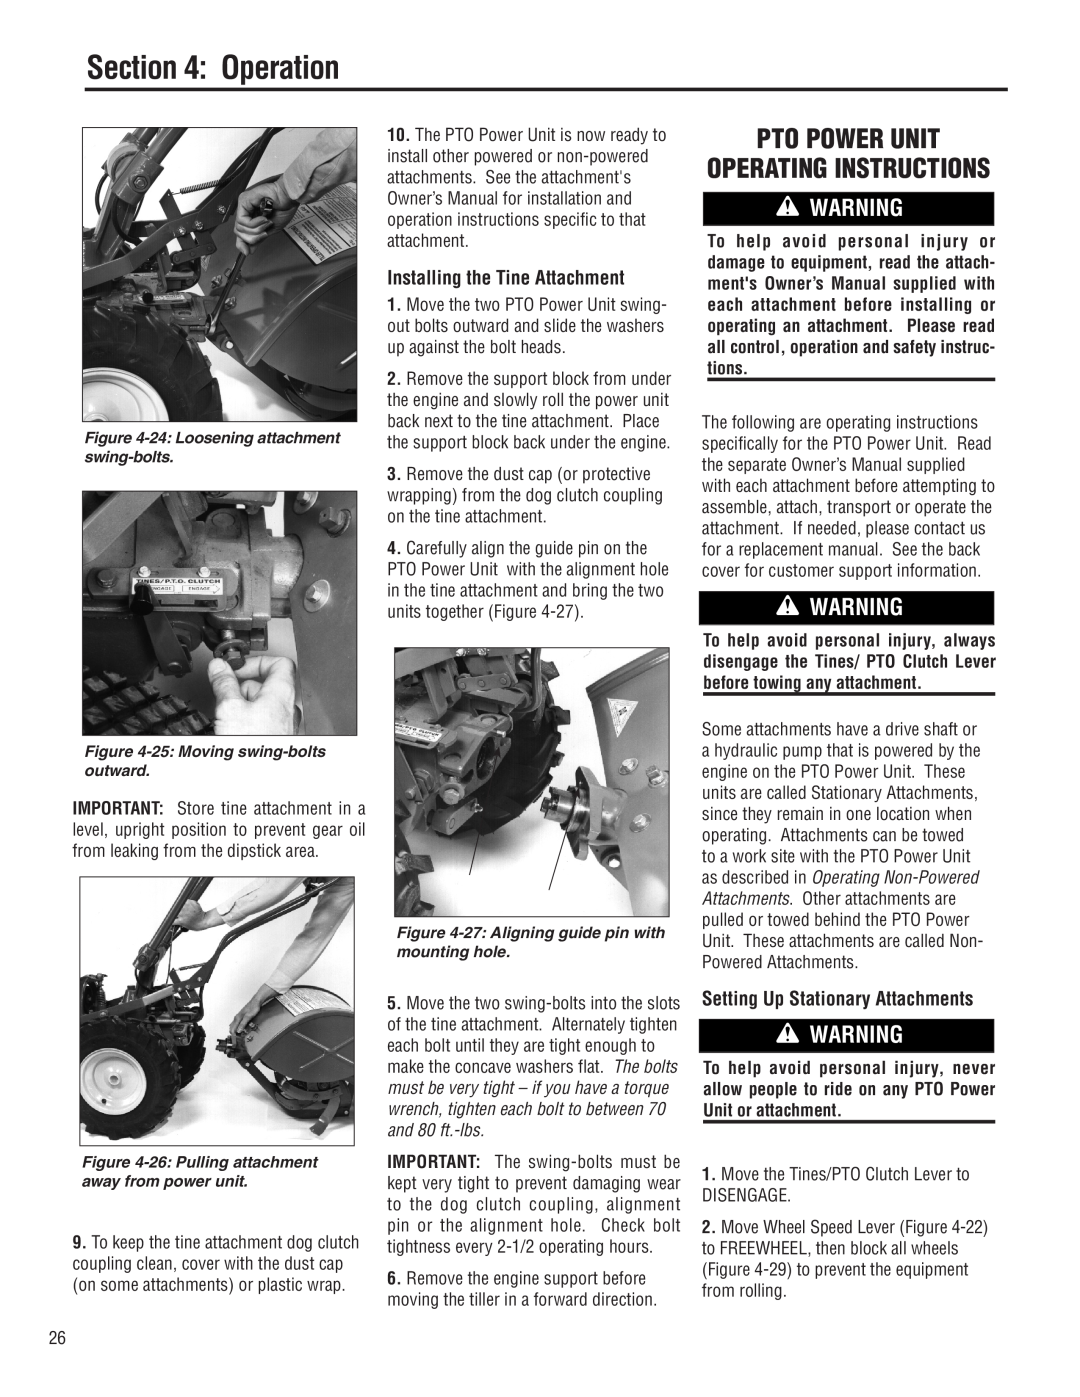 Troy-Bilt E683G Pto Power Unit Operating Instructions, Installing the Tine Attachment, Setting Up Stationary Attachments 